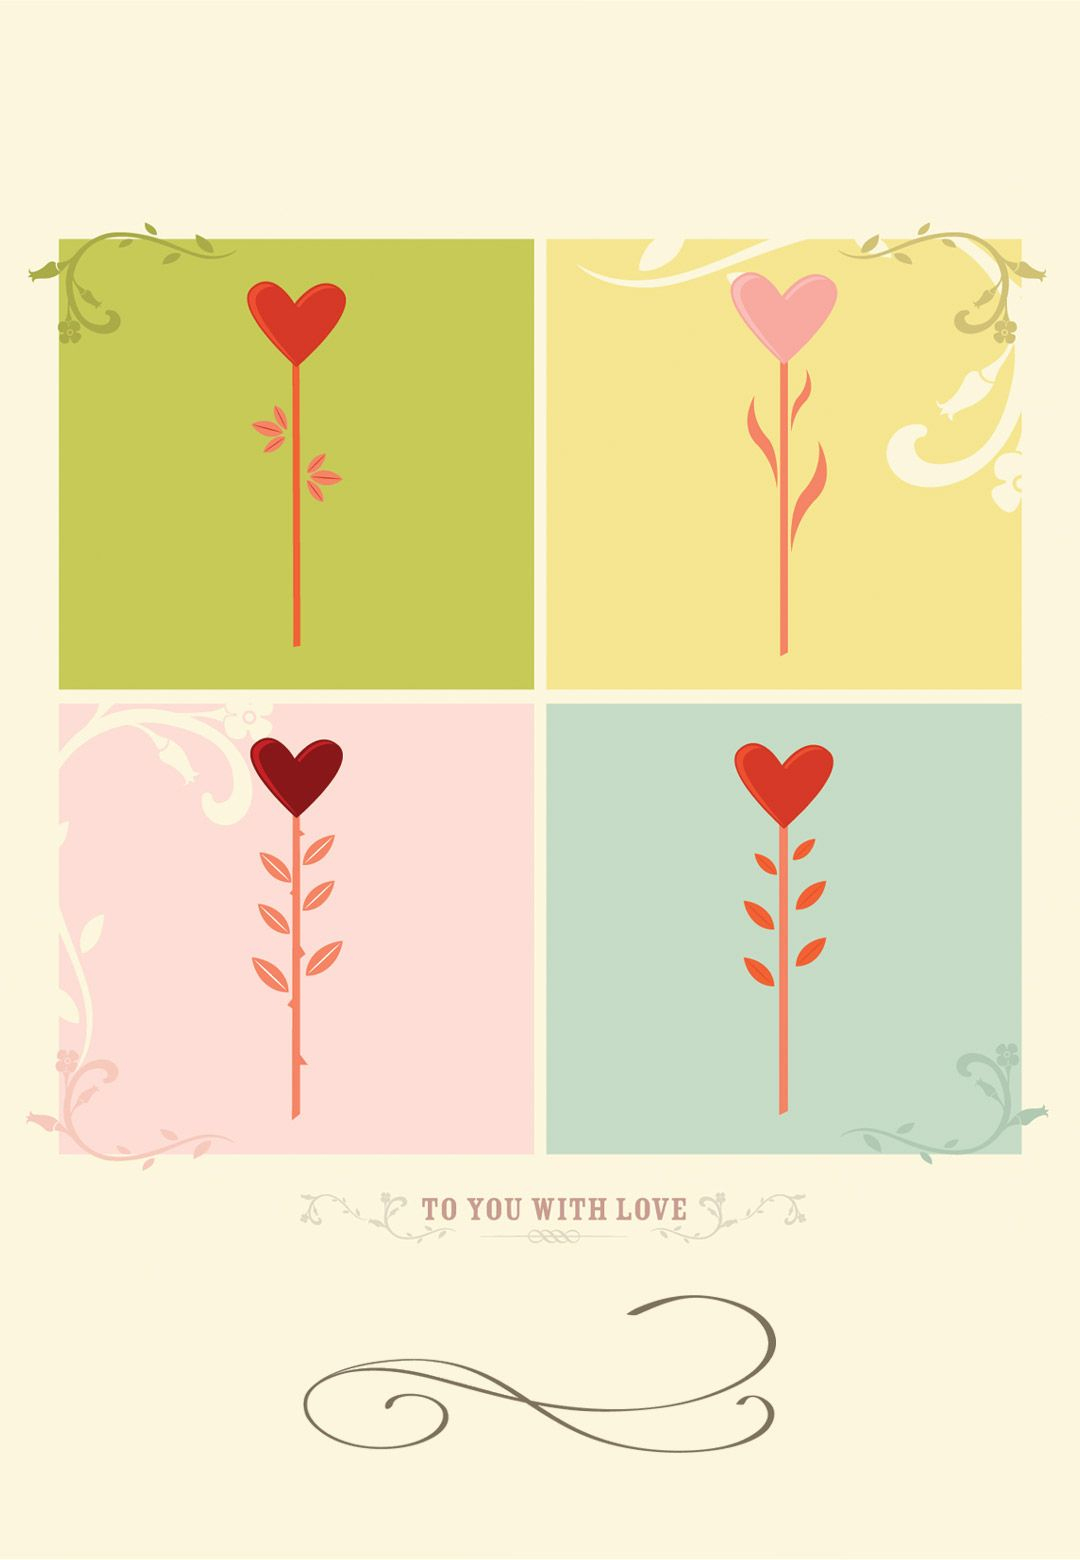 Free Printable To You With Love Greeting Card | Home | Pinterest - Free Printable Love Greeting Cards